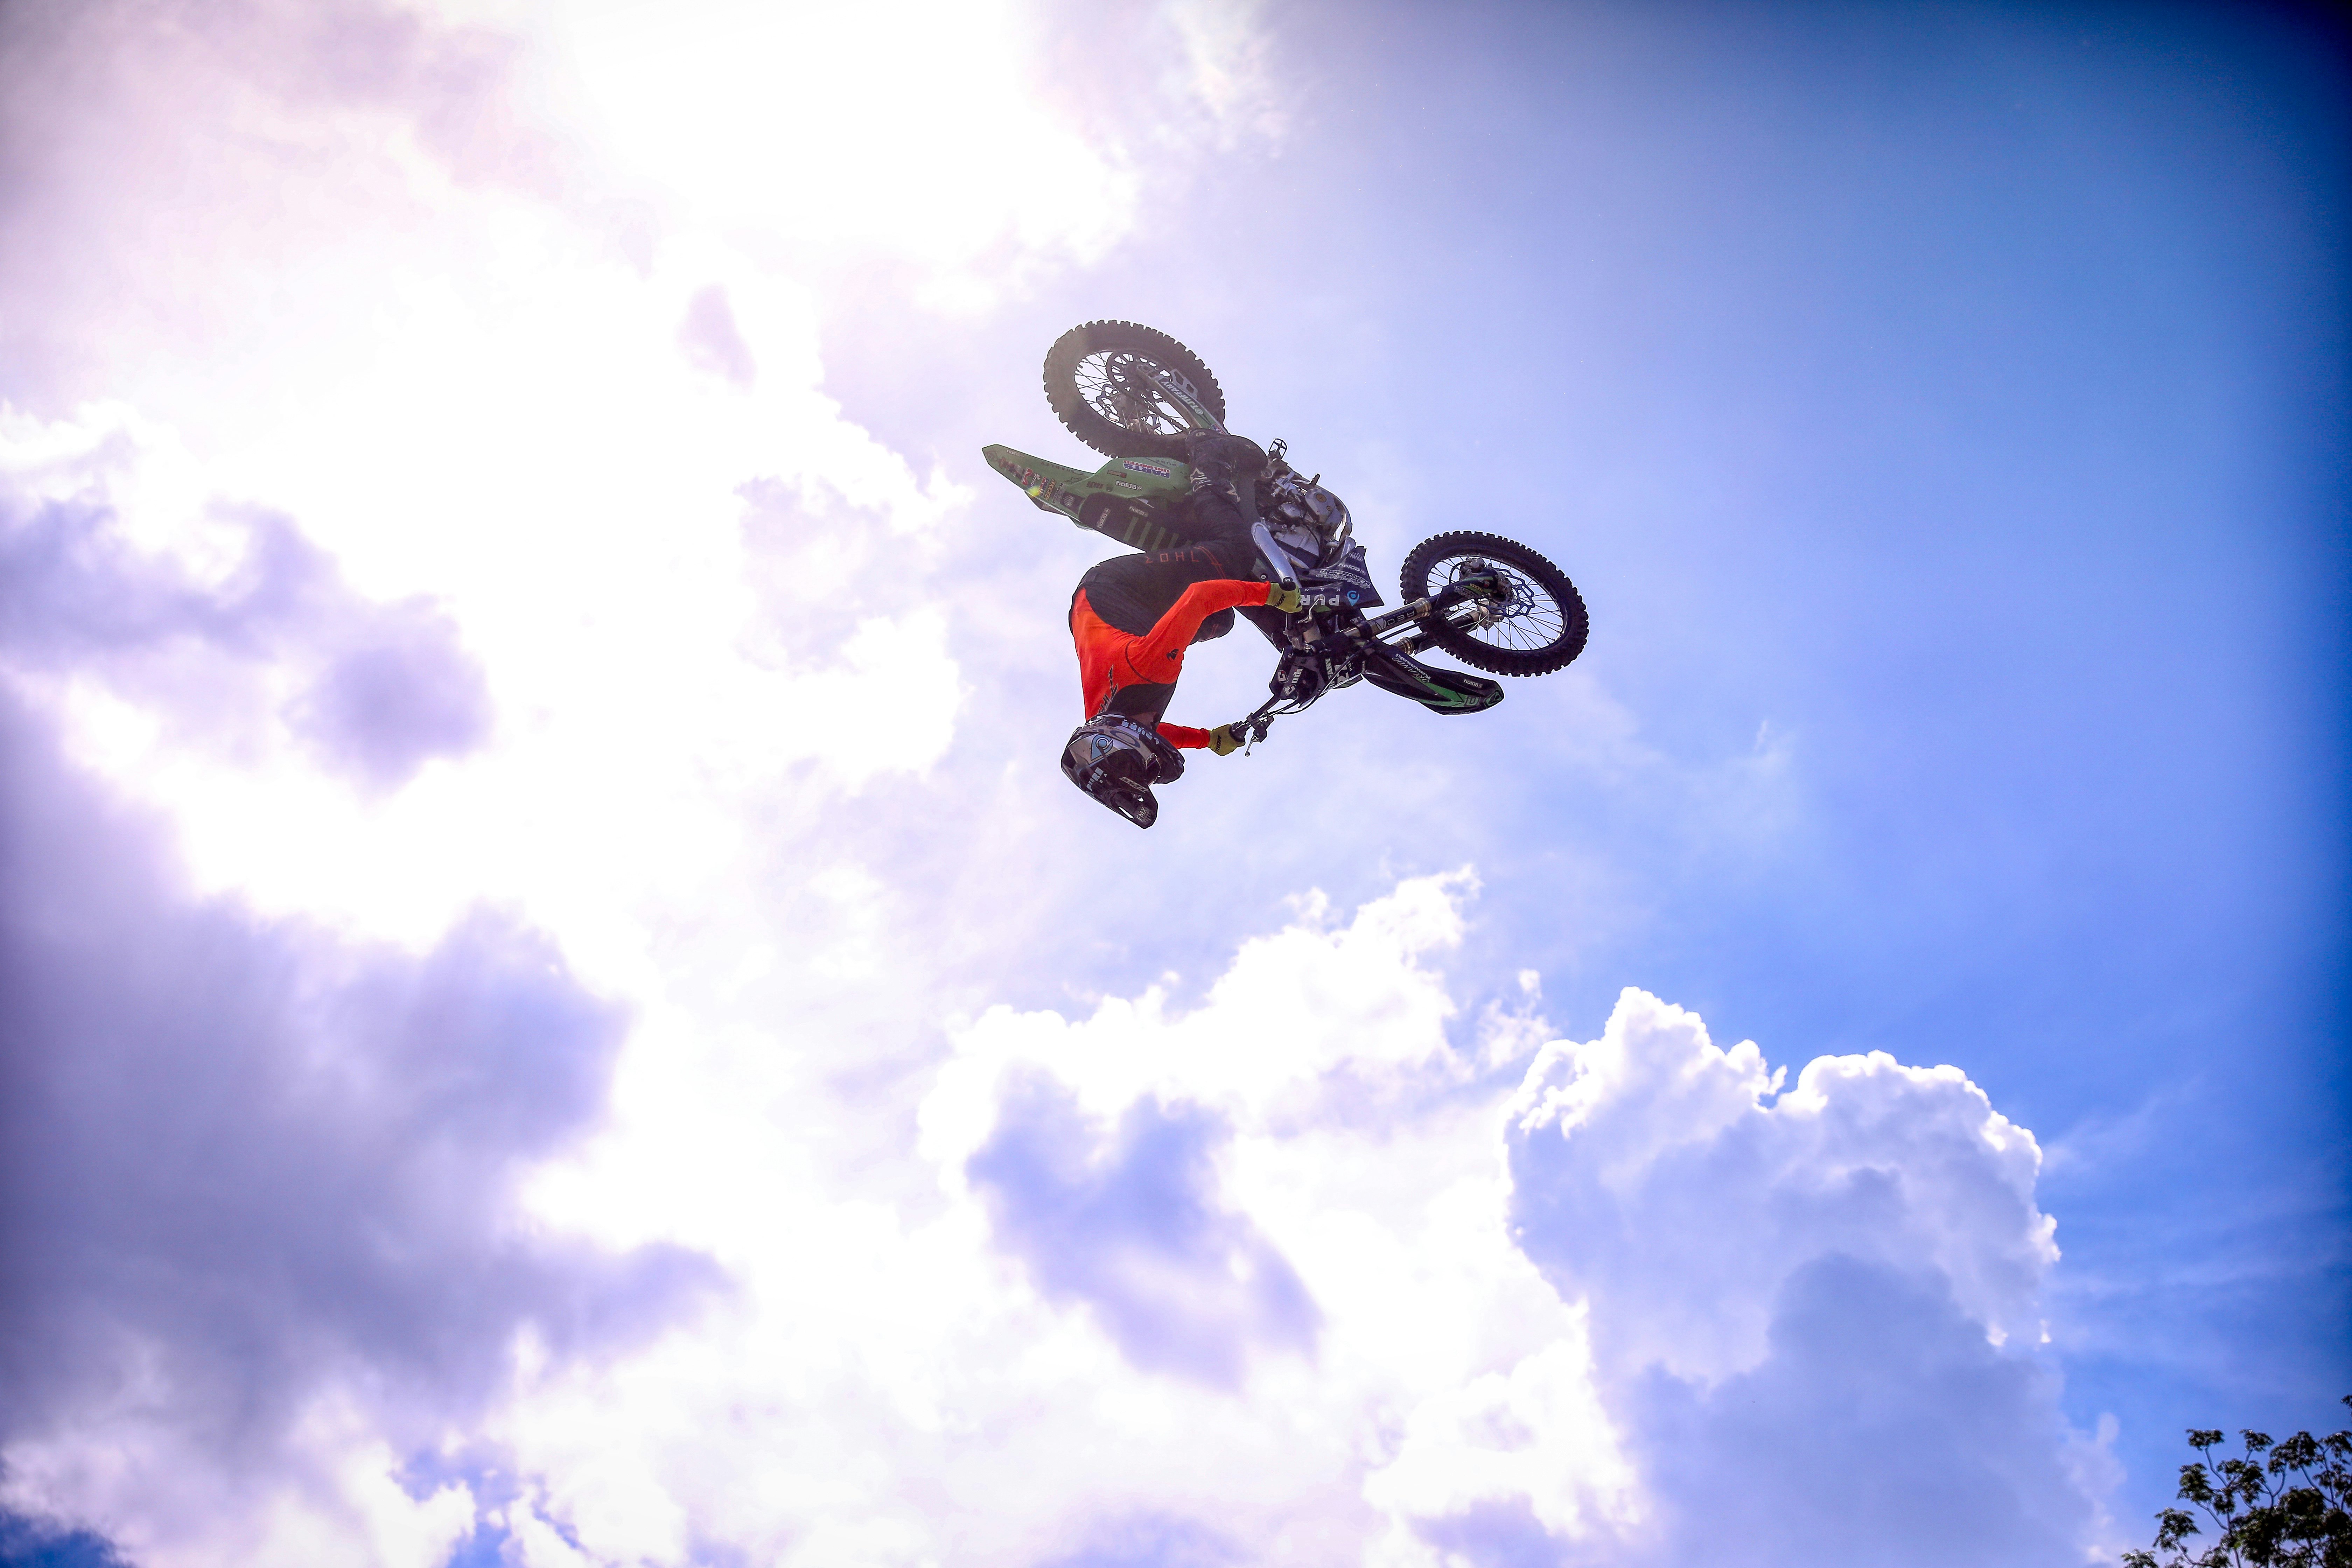 man riding on black bmx bike doing stunts under blue and white sunny cloudy sky during